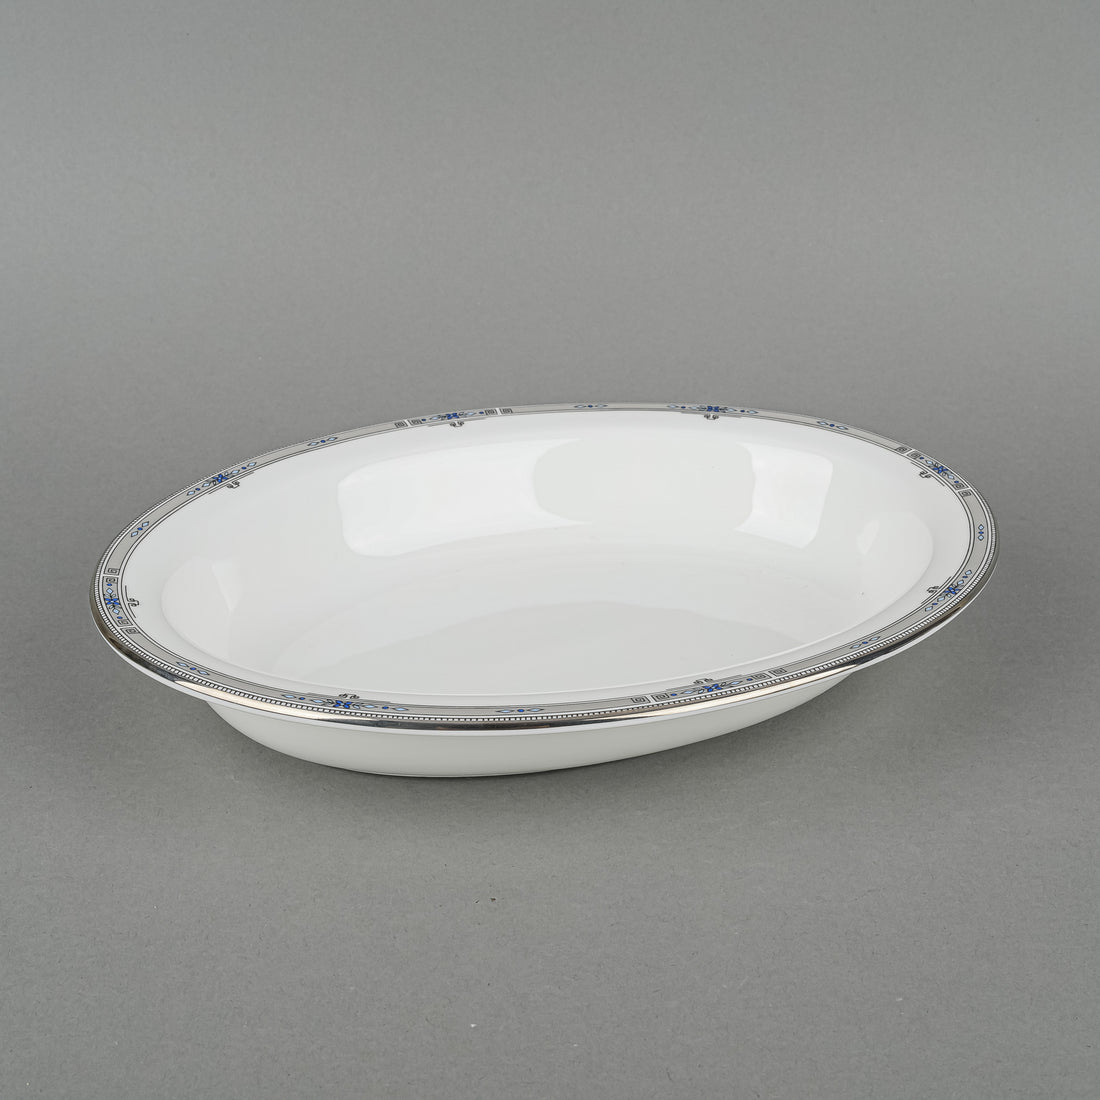 WEDGWOOD Amherst Serving Dishes - 6 Pieces